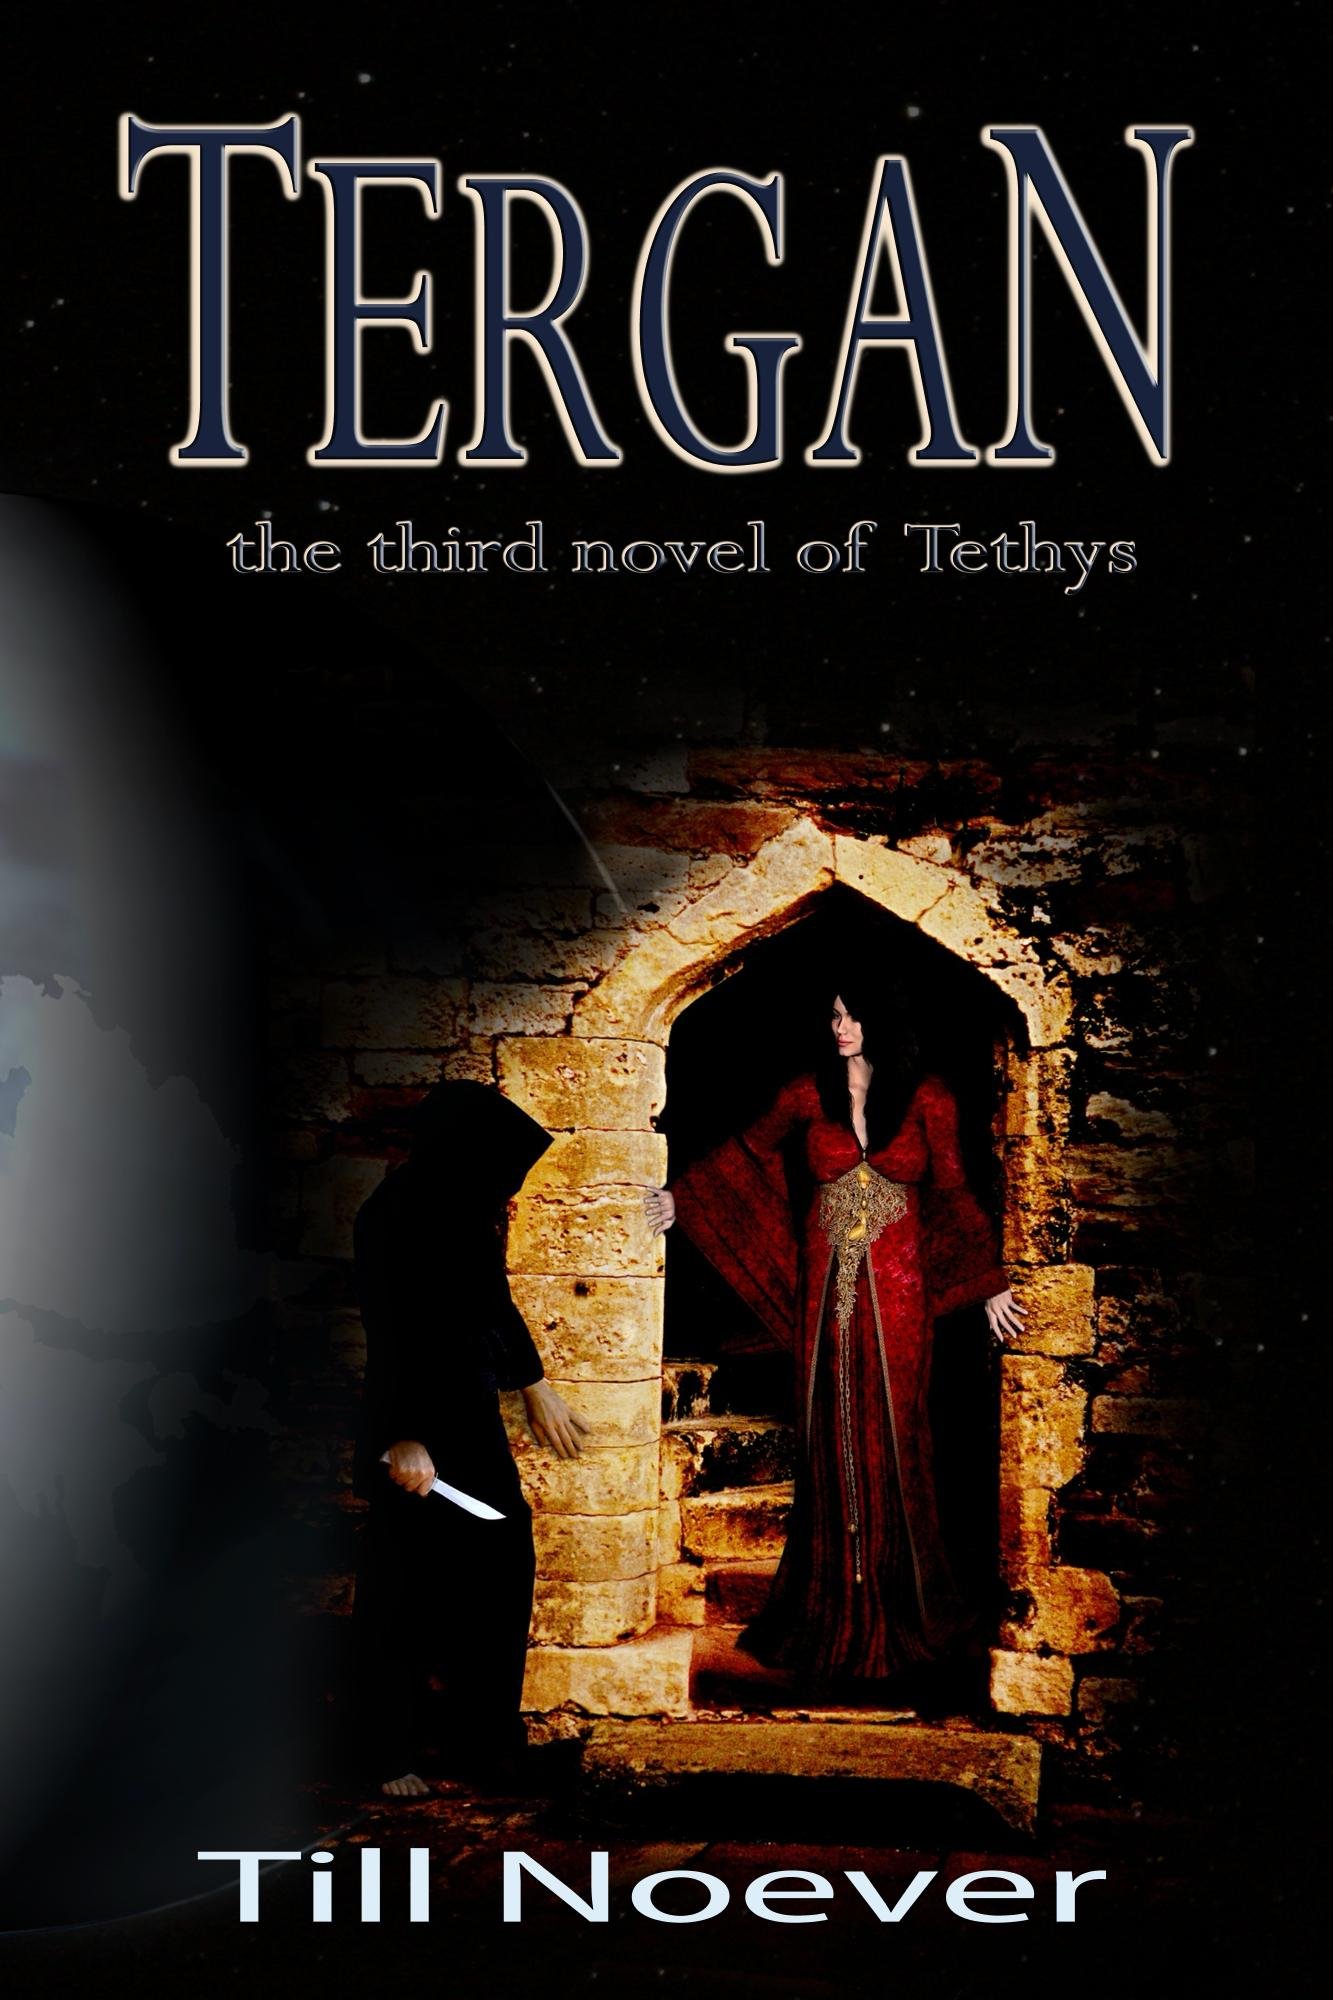 Tergan_Cover_for_Kindle.jpg